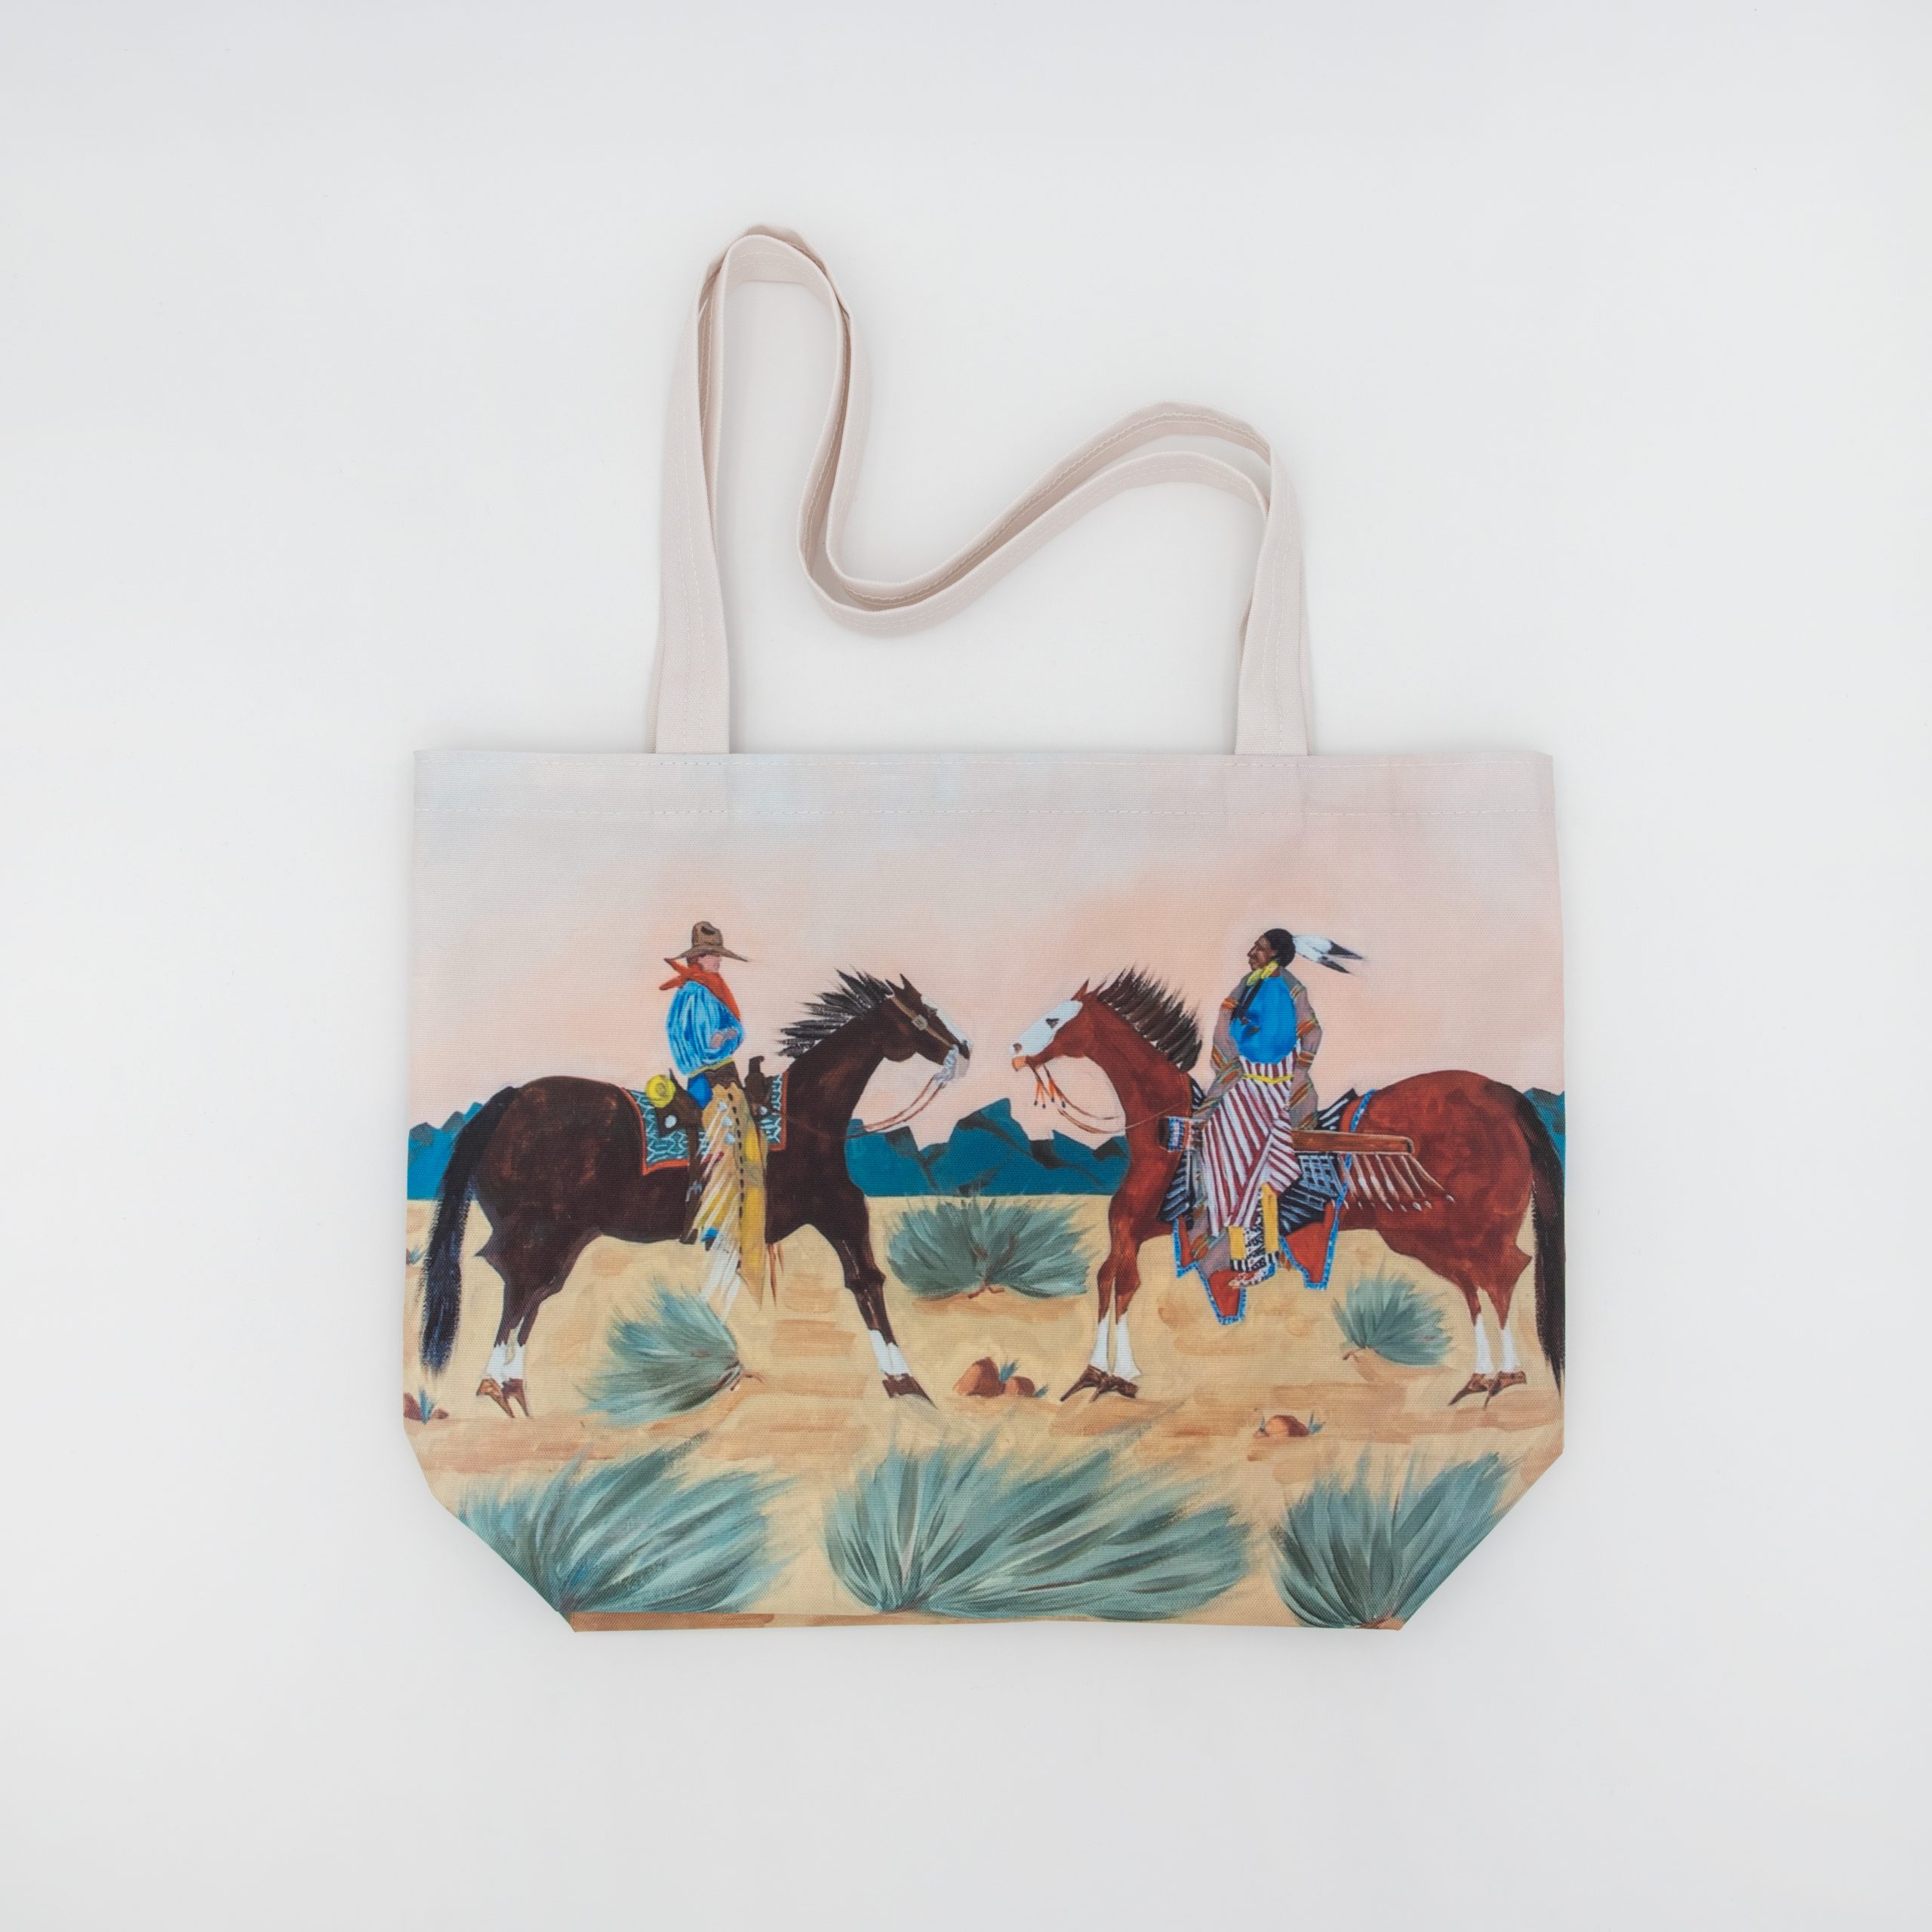 Western Voices Canvas Tote, with art by Chloé Marie Burk